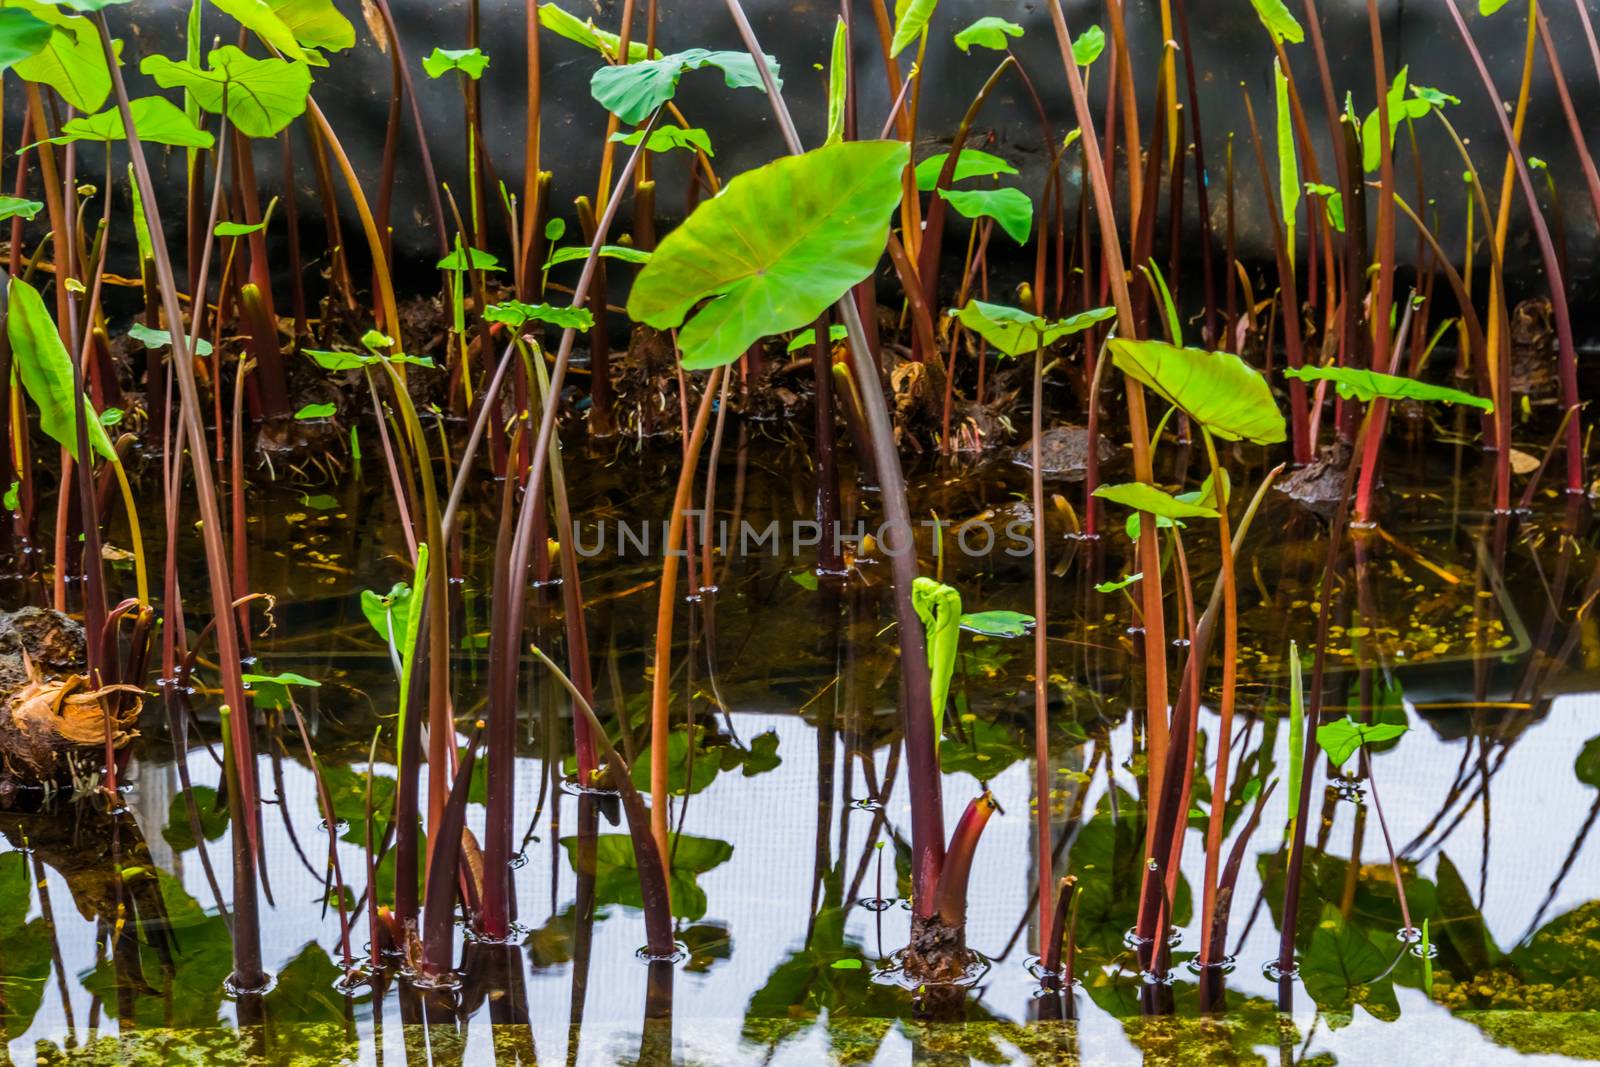 group of Taro plants in the water, Cultivation of tropical plants and vegetables, agriculture background